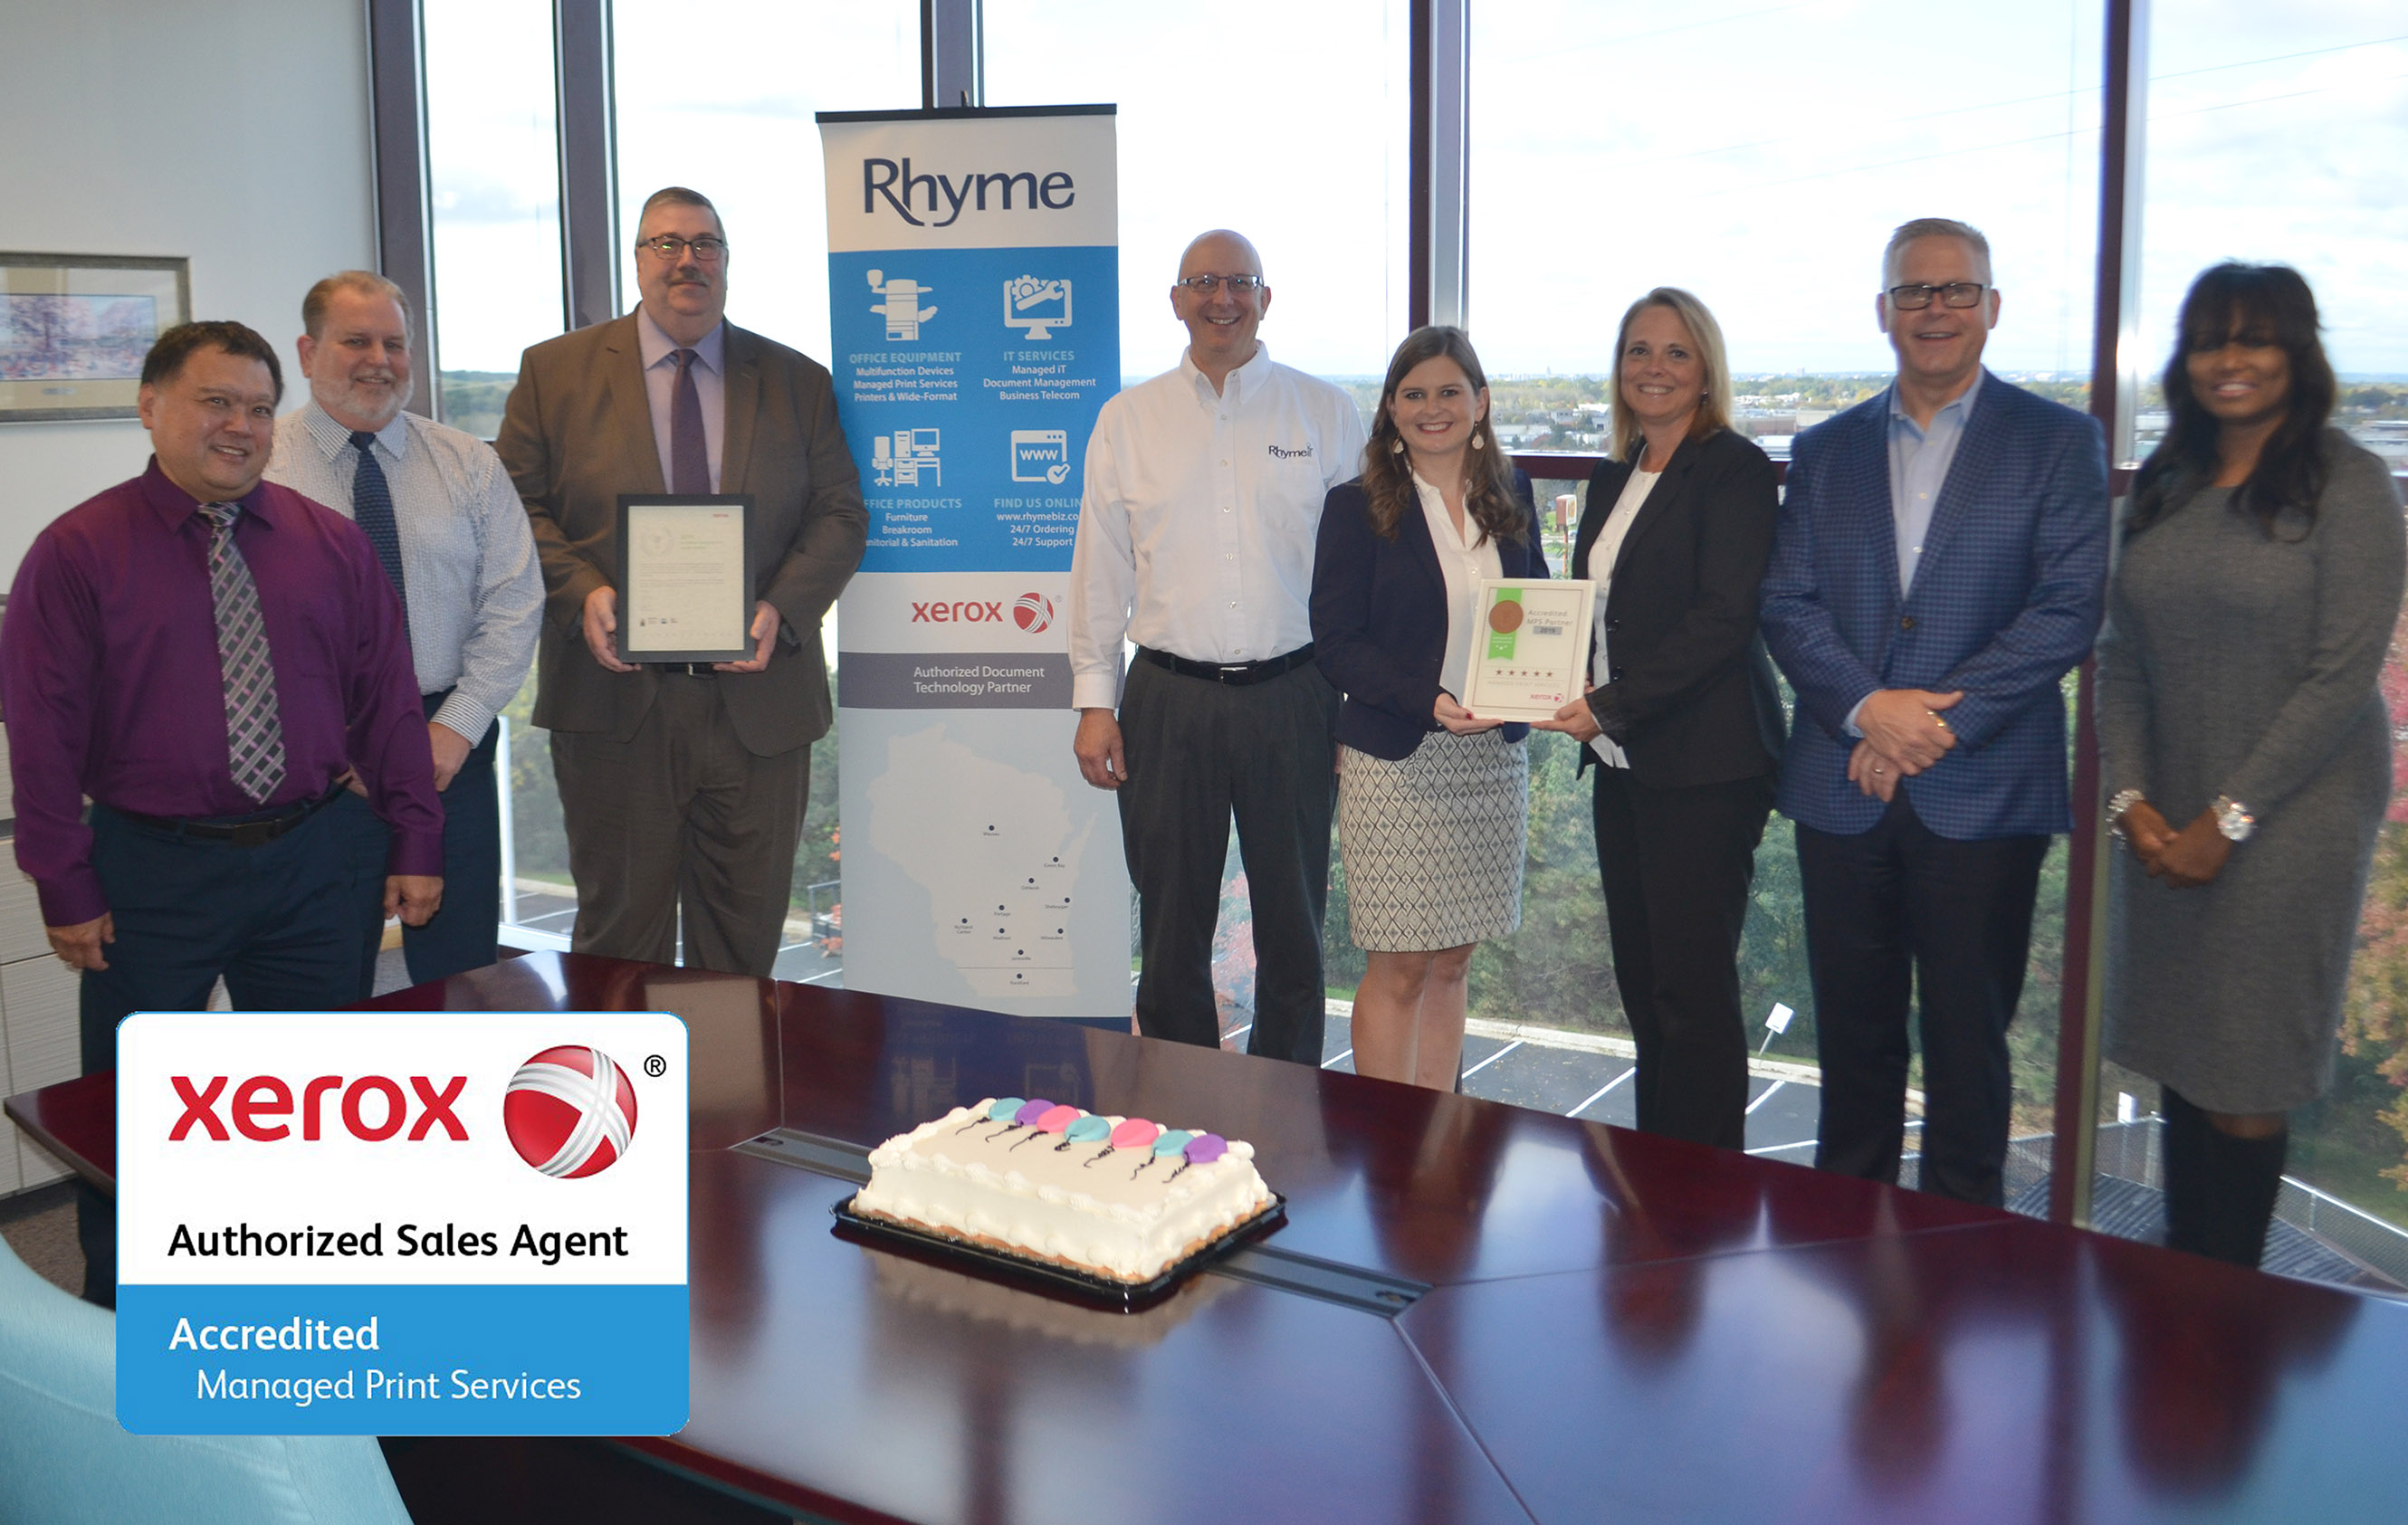 Rhyme Employees Receive Xerox Accreditation for Managed Print Services